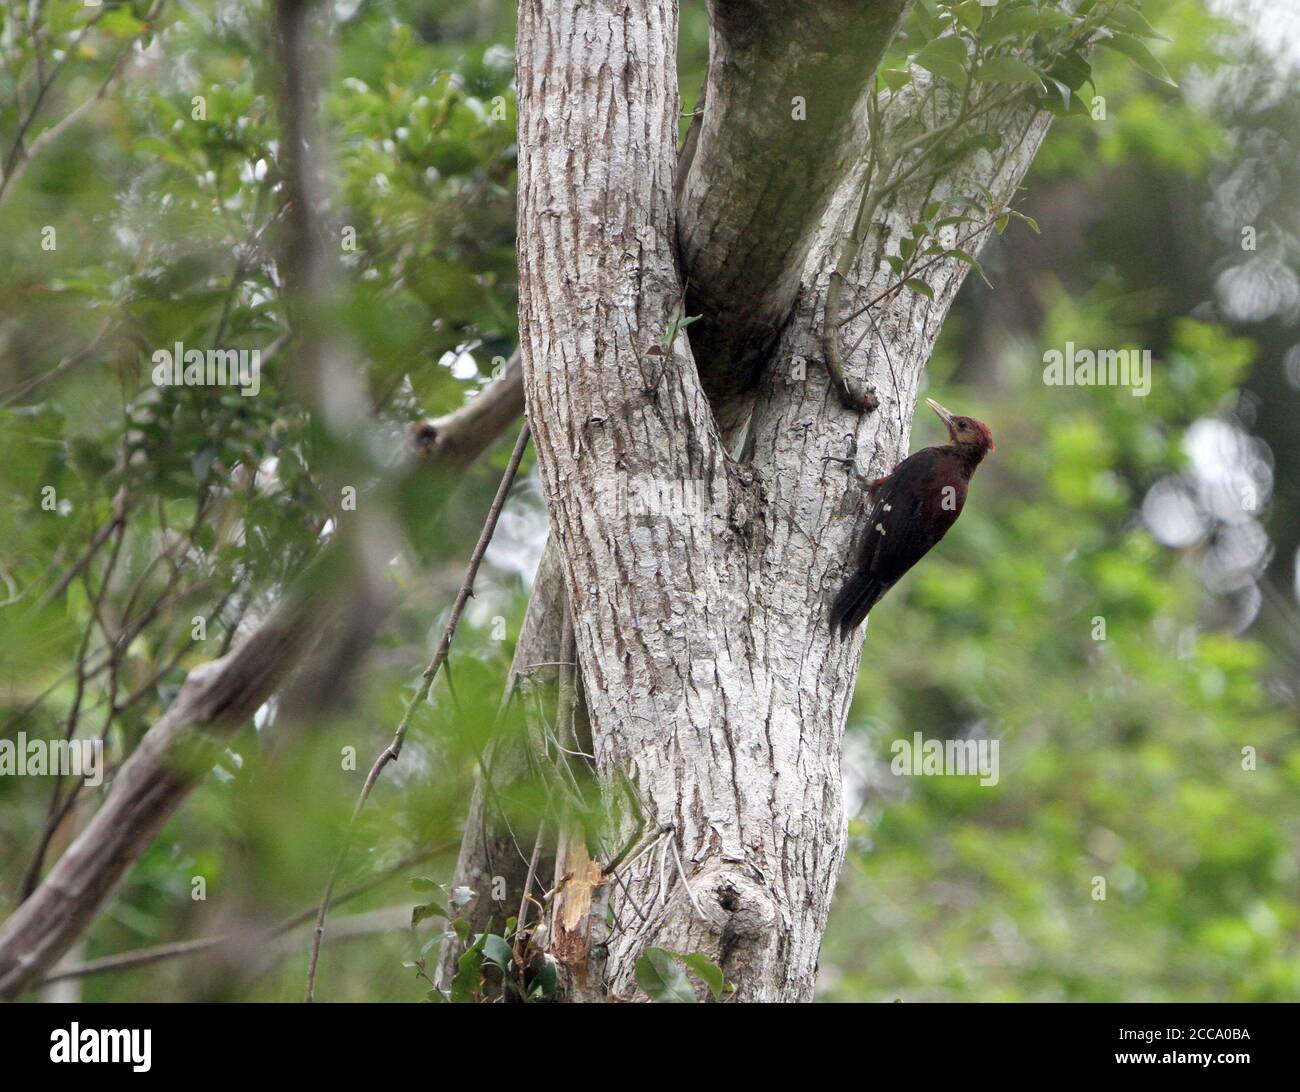 Critically endangered Okinawa Woodpecker (Dendrocopos noguchii) clinging to a tree in Japan. Also known as Noguchi's, Okinawan, Pryer's or Ryukyu wood Stock Photo